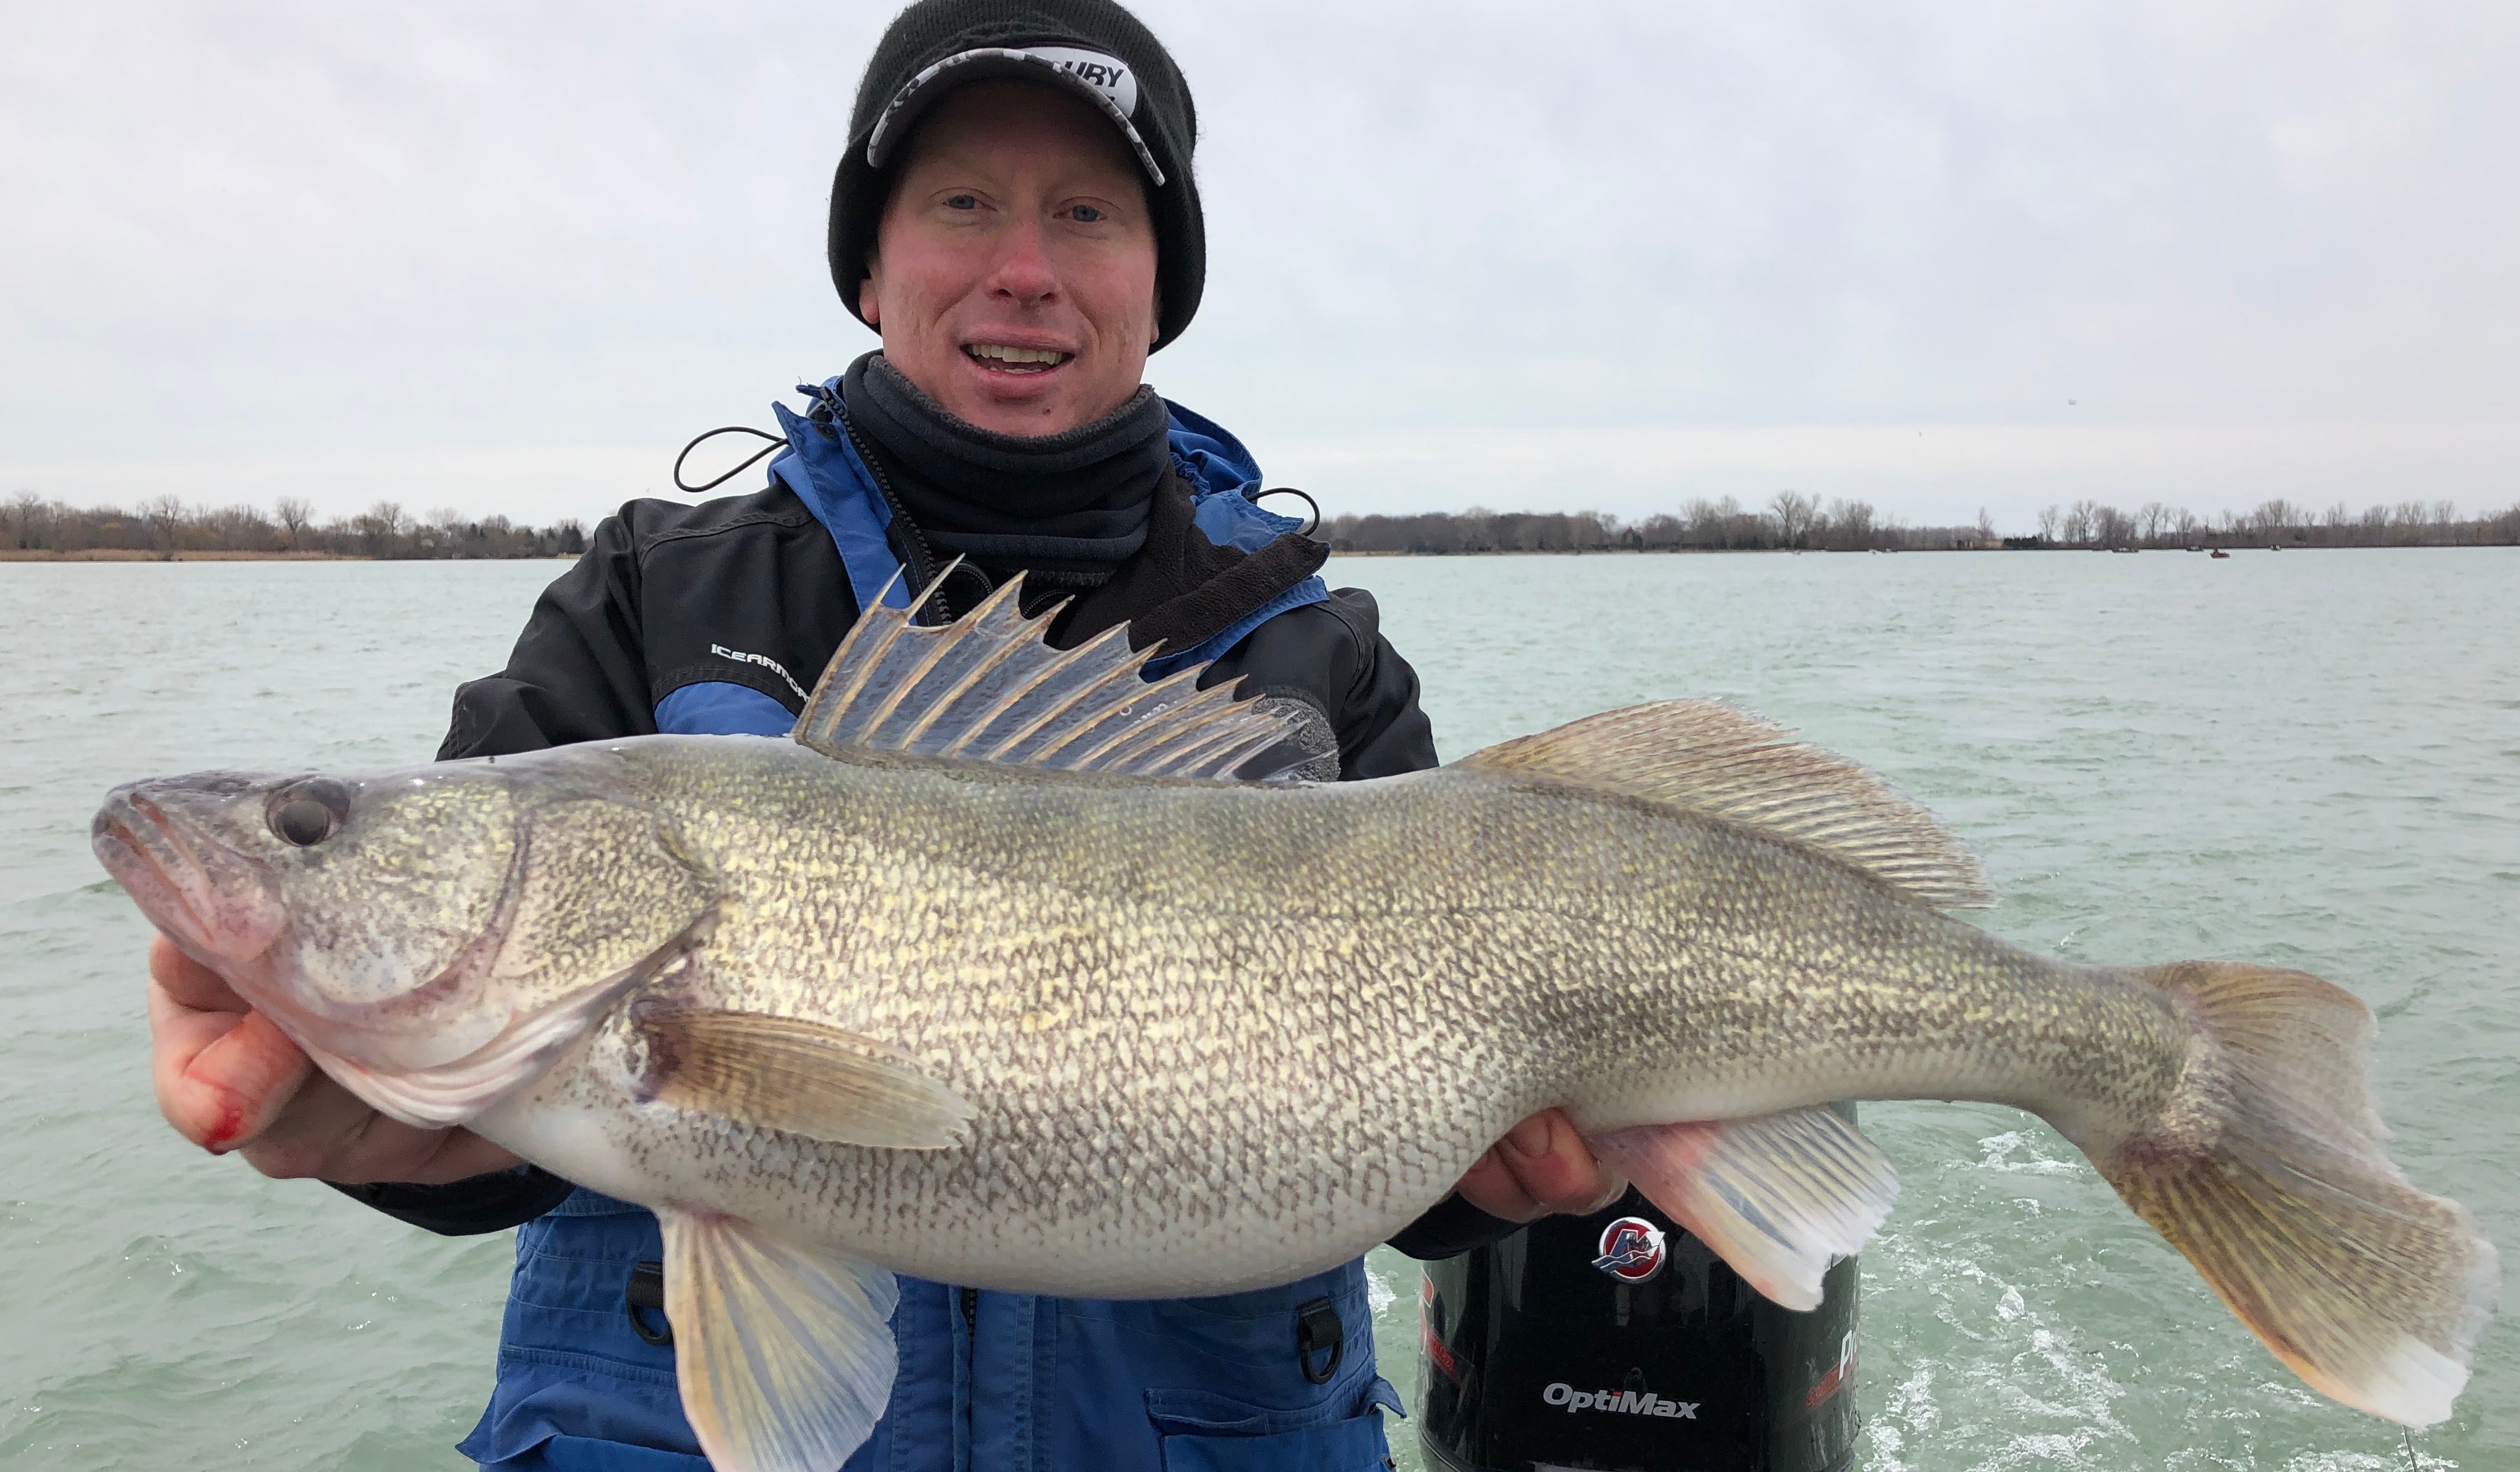 The Largest Walleye Run in the World – Cortland Line Company